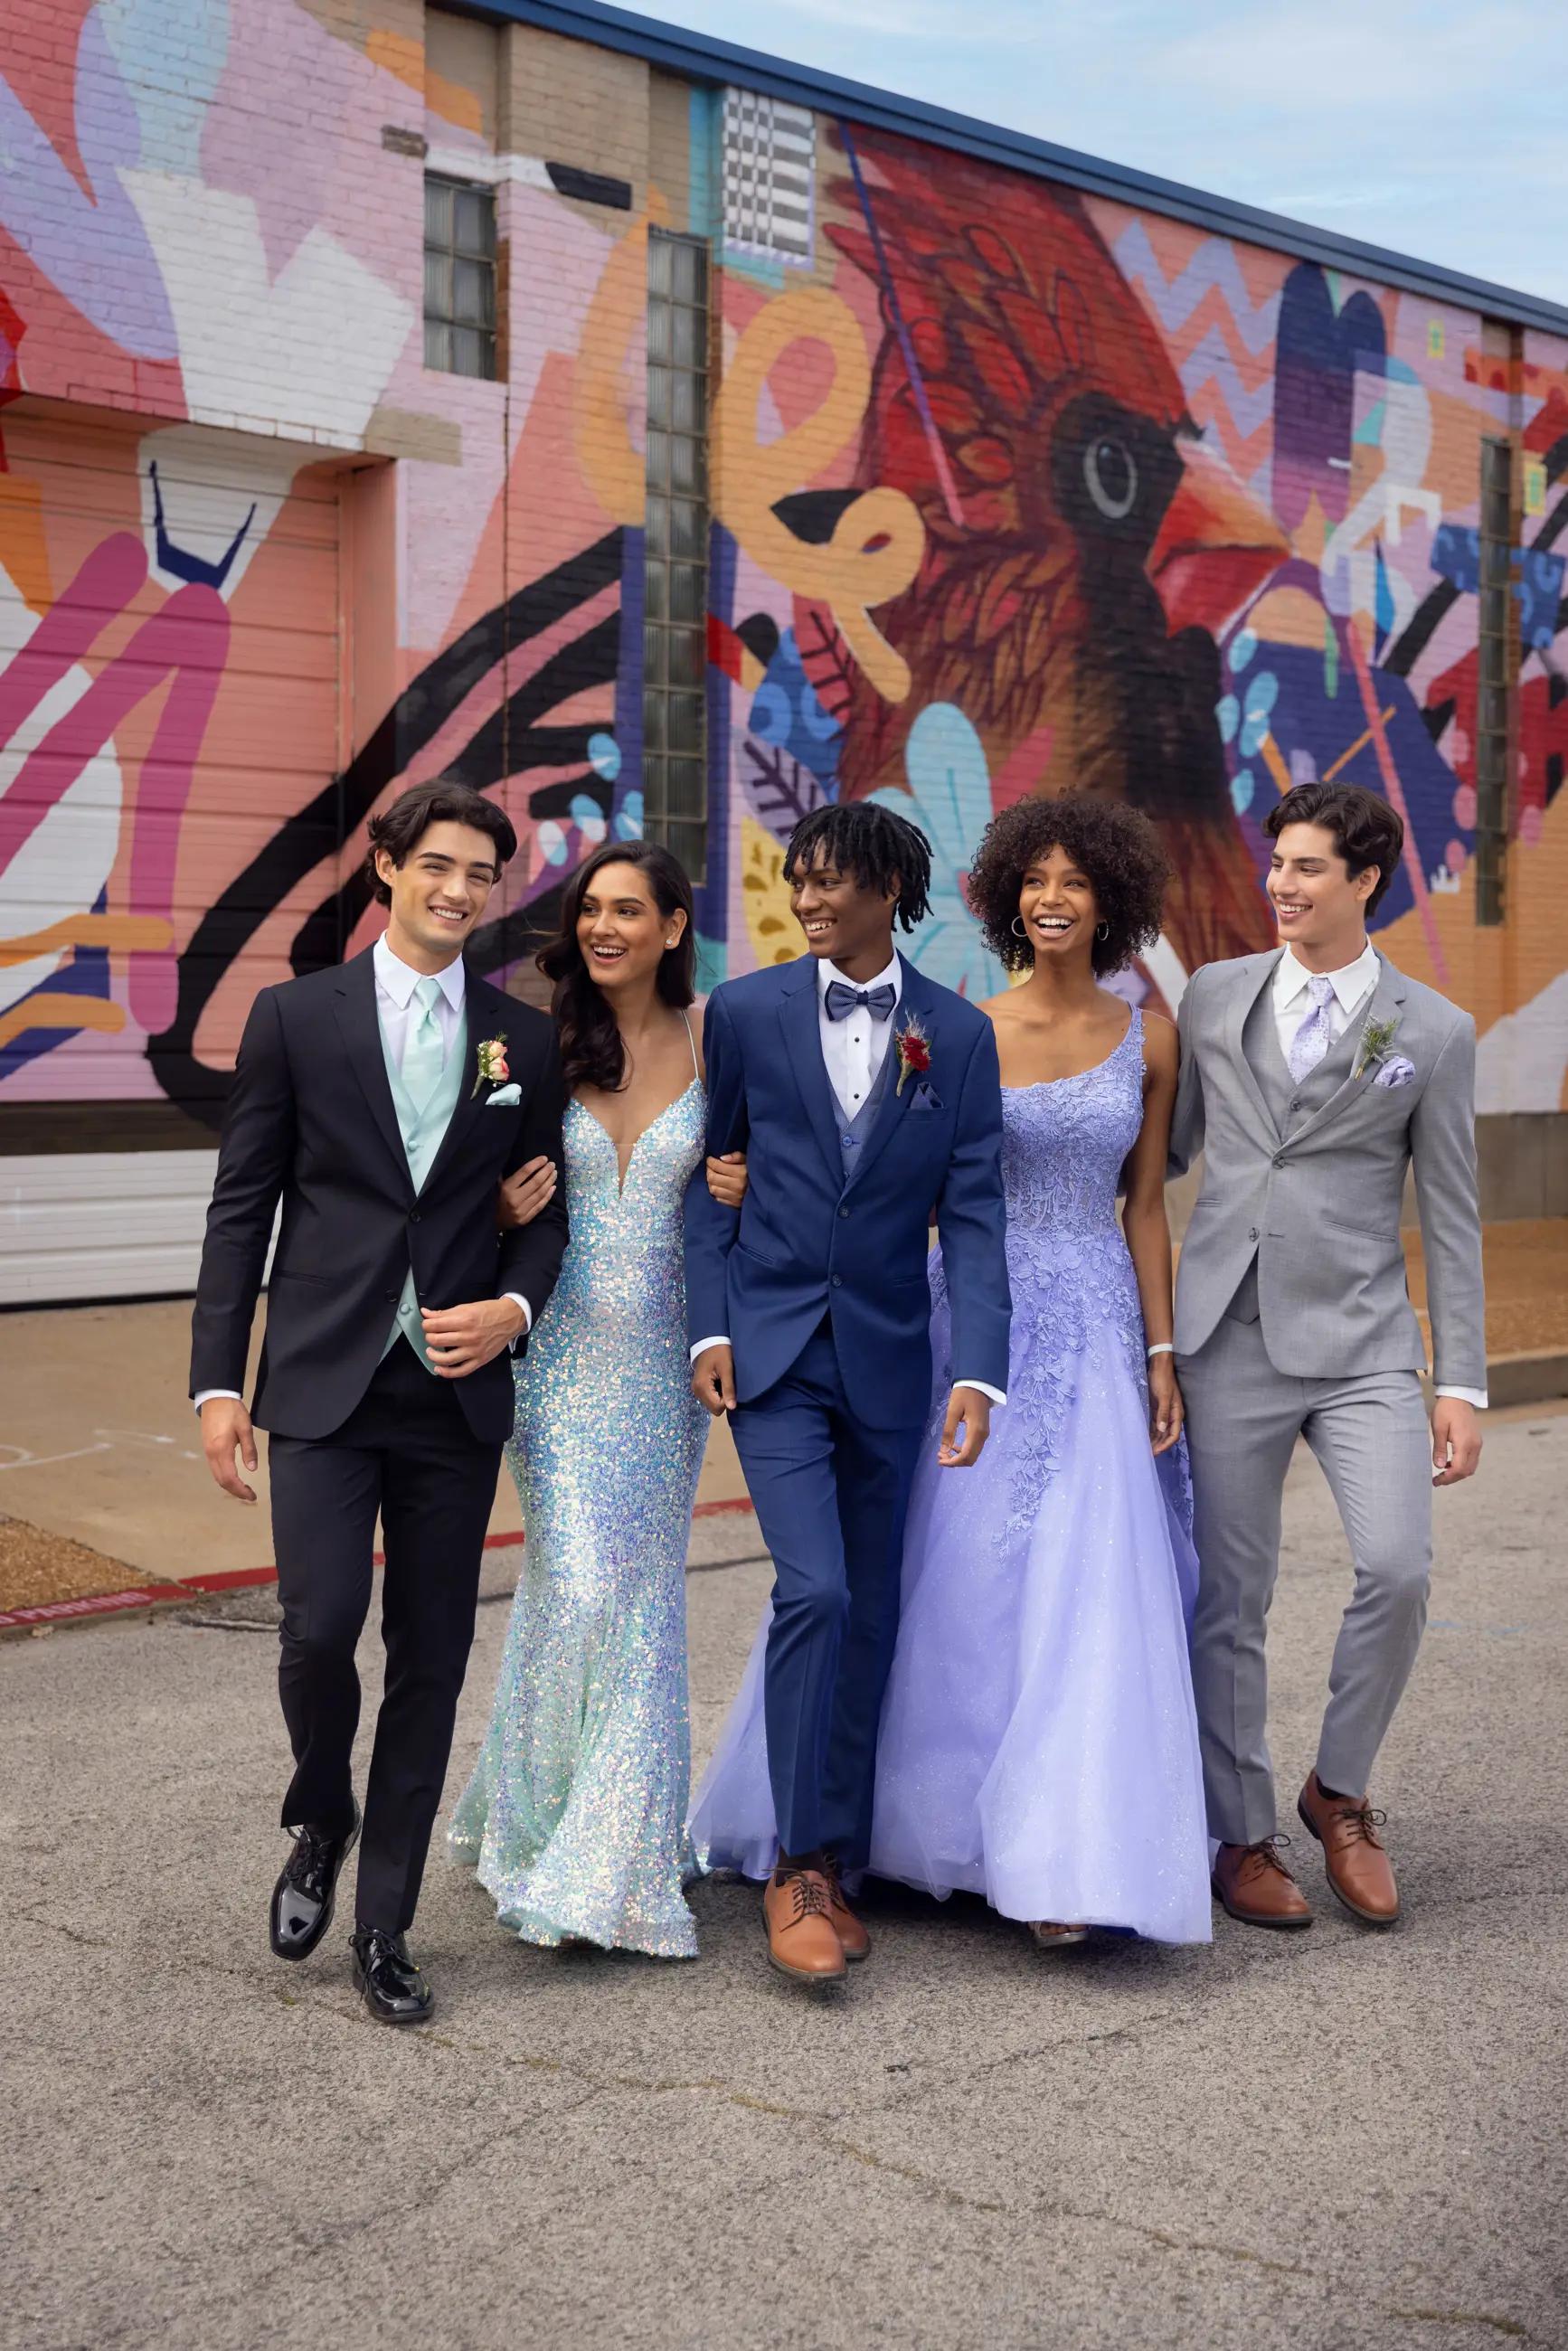 Group of teens wearing prom attire